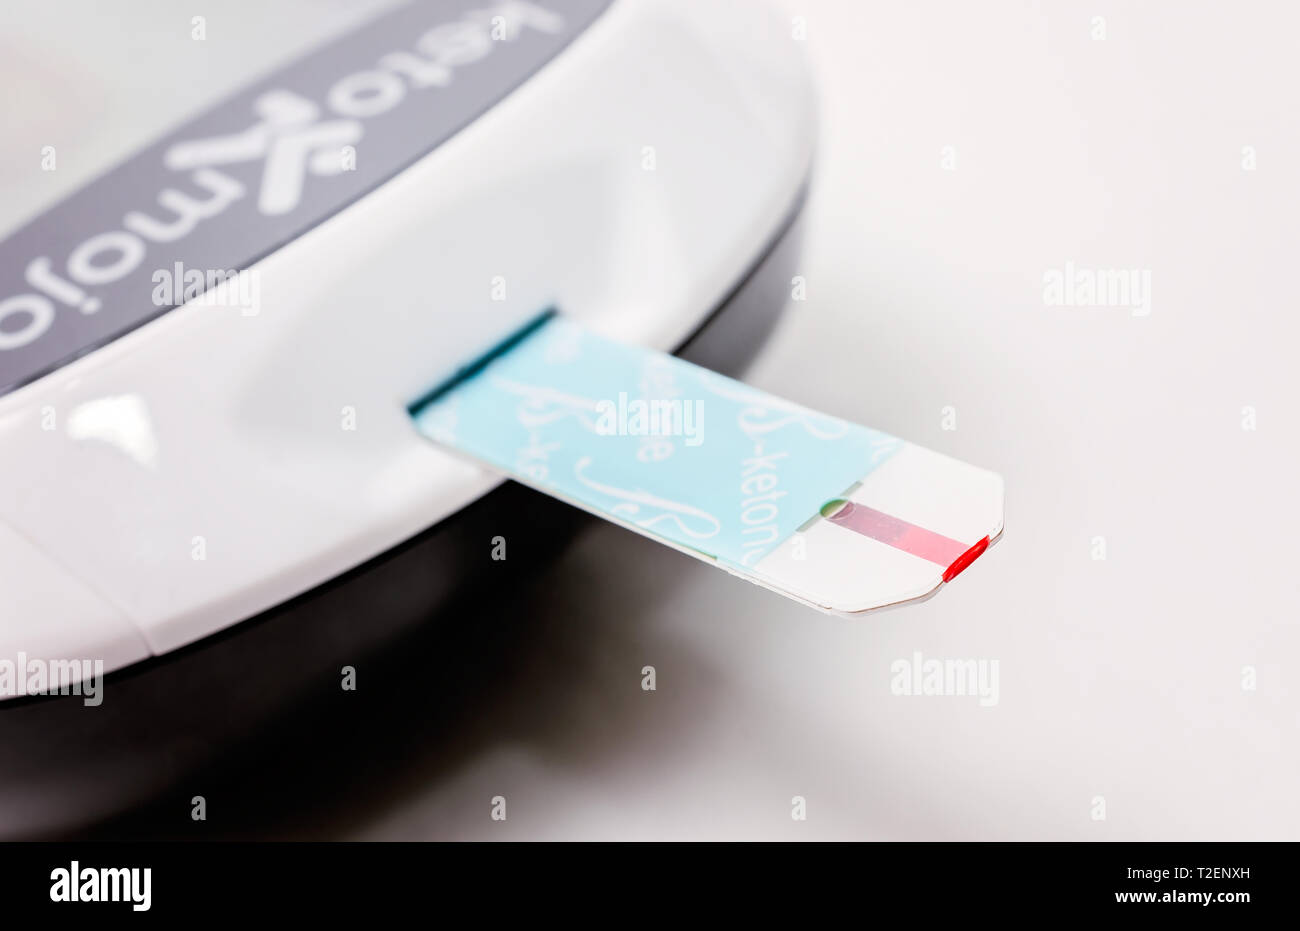 A Keto-Mojo ketone and blood glucose meter is pictured on white, along with a ketone test strip, March 30, 2019, in Coden, Alabama. Stock Photo